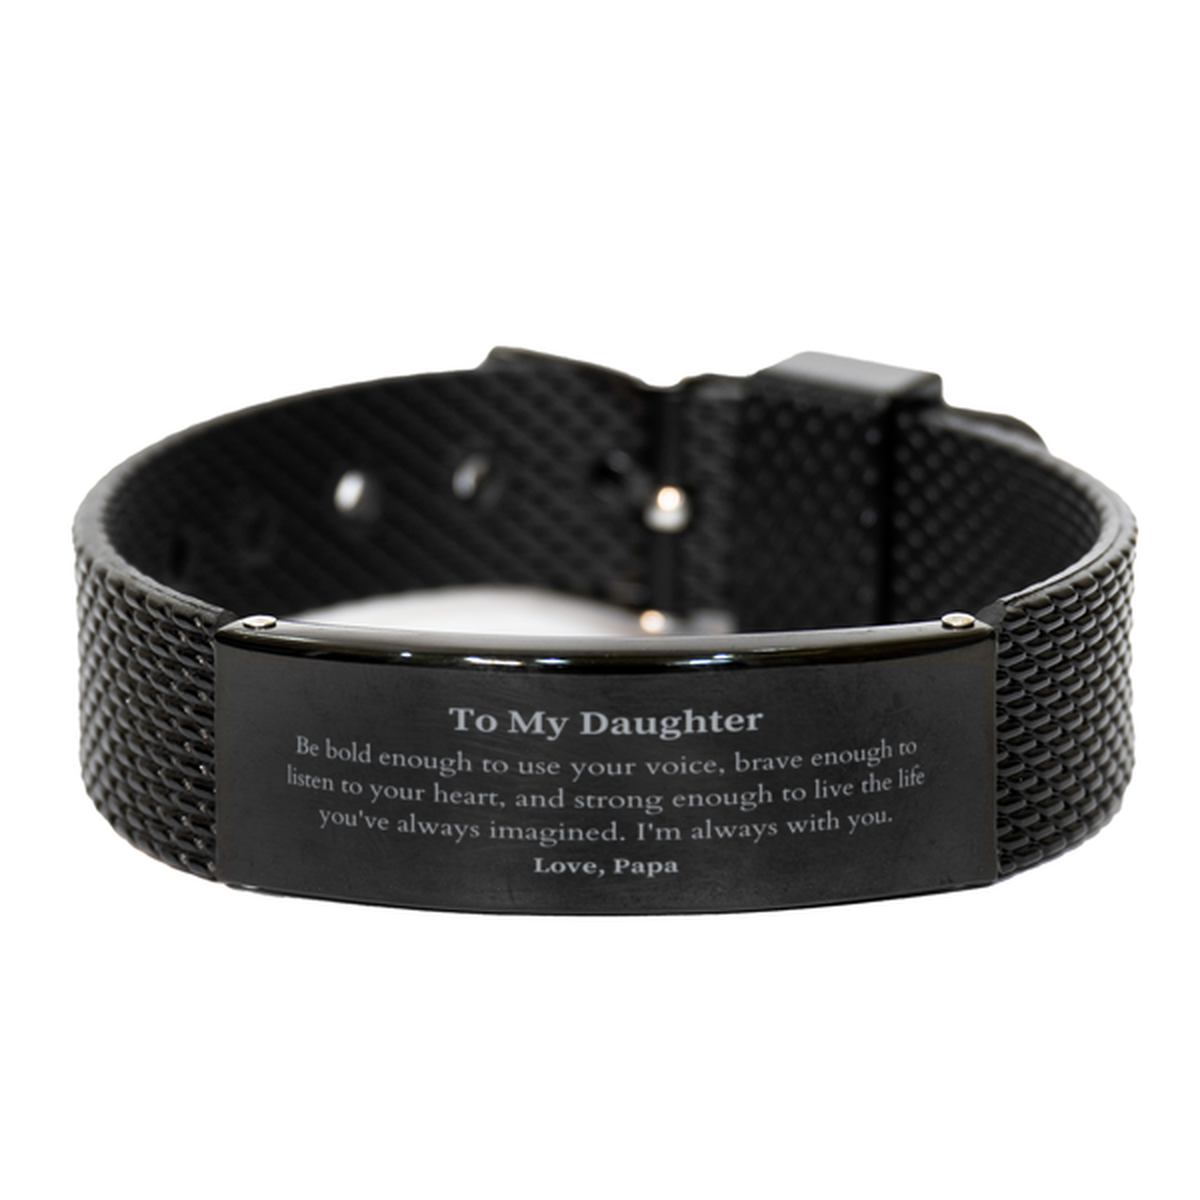 Keepsake Daughter Black Shark Mesh Bracelet Gift Idea Graduation Christmas Birthday Daughter from Papa, Daughter Be bold enough to use your voice, brave enough to listen to your heart. Love, Papa